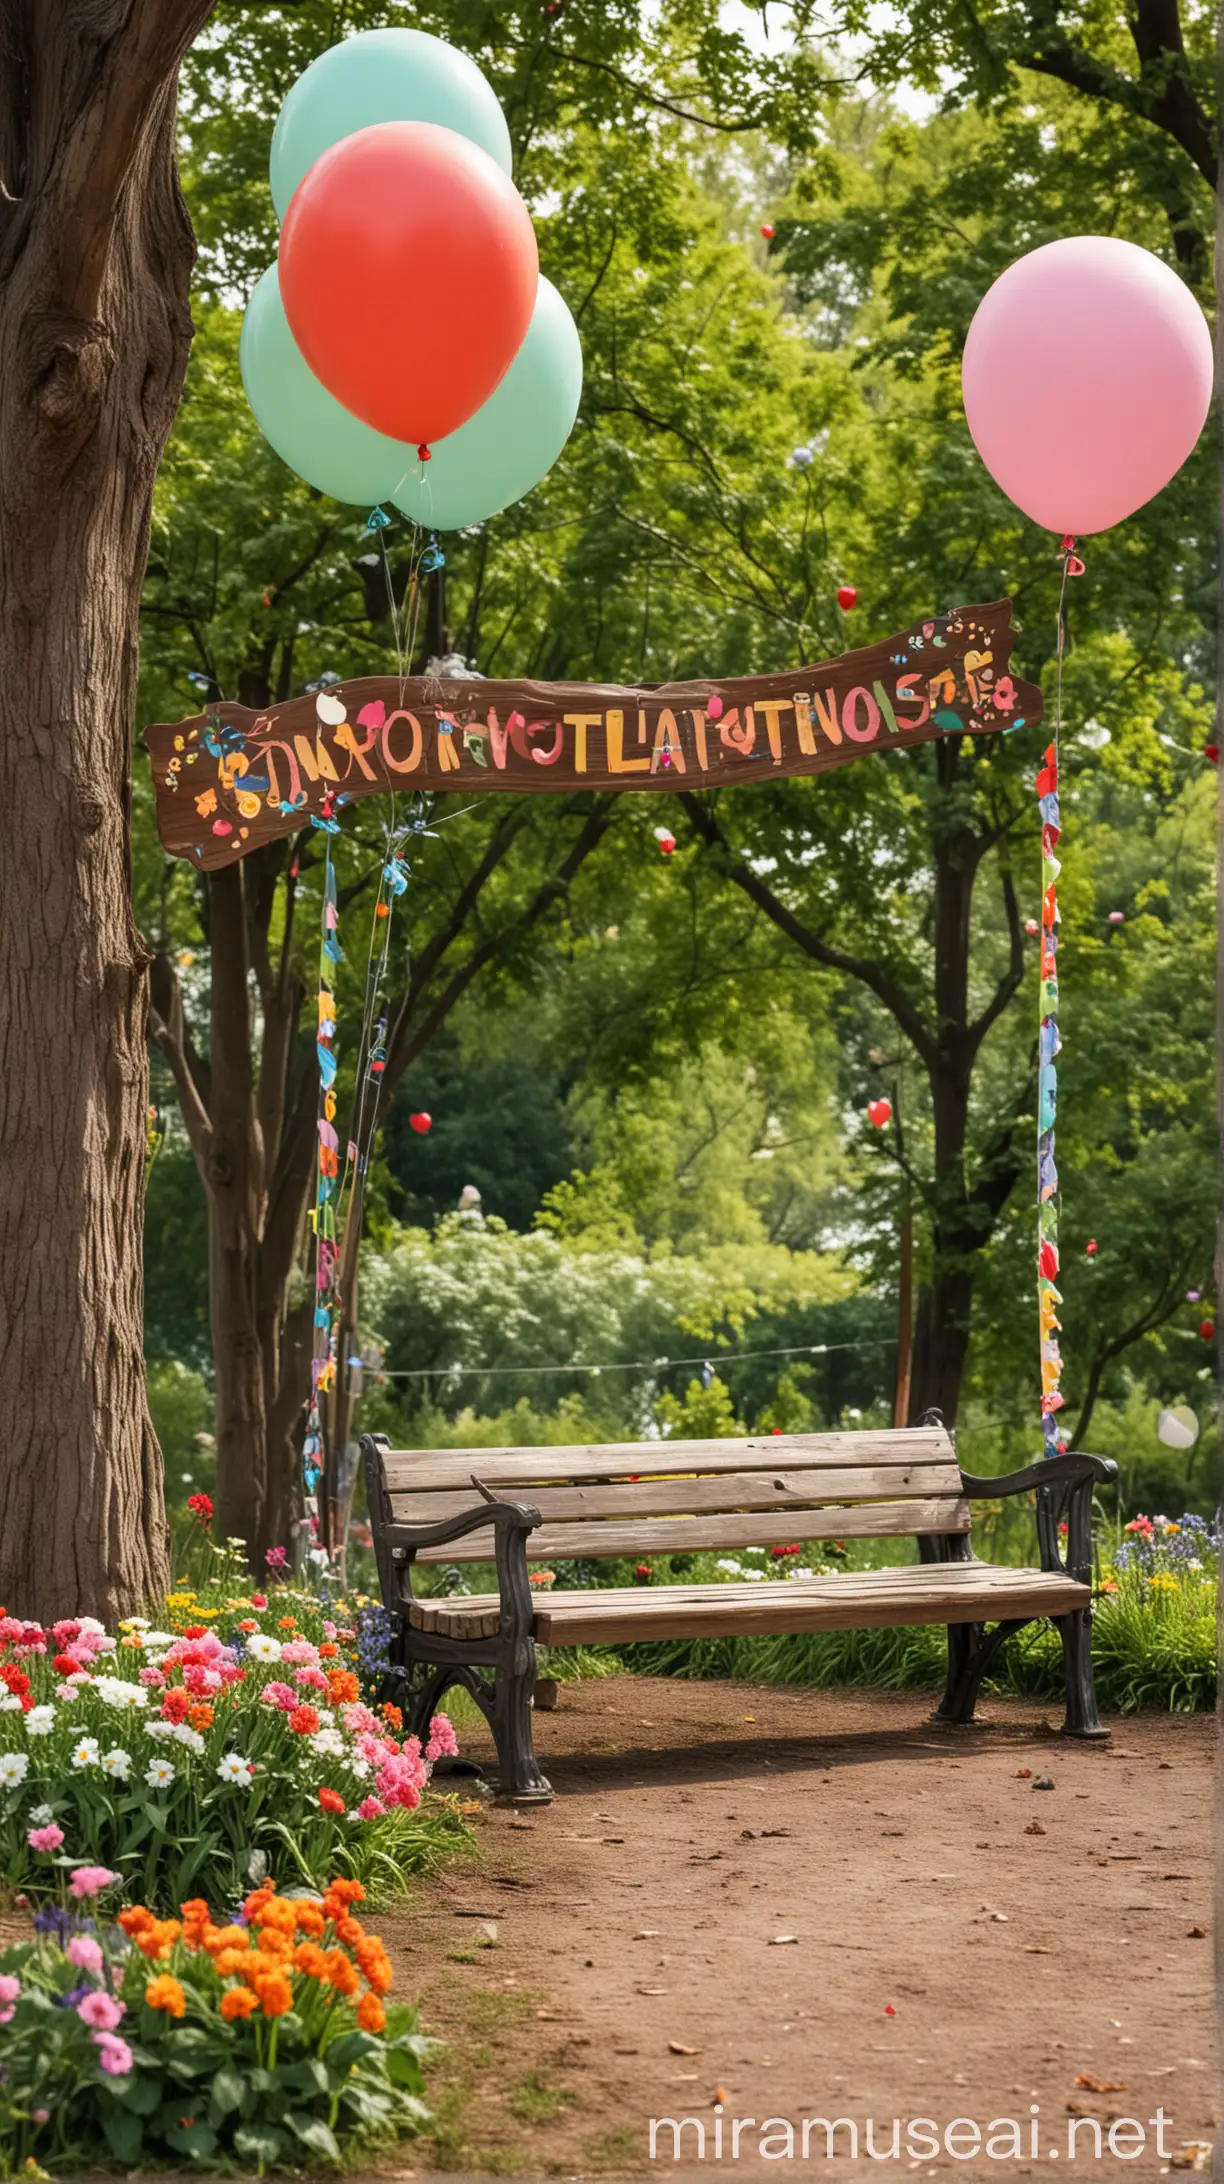 Park Bench Celebration with Balloons and Birds